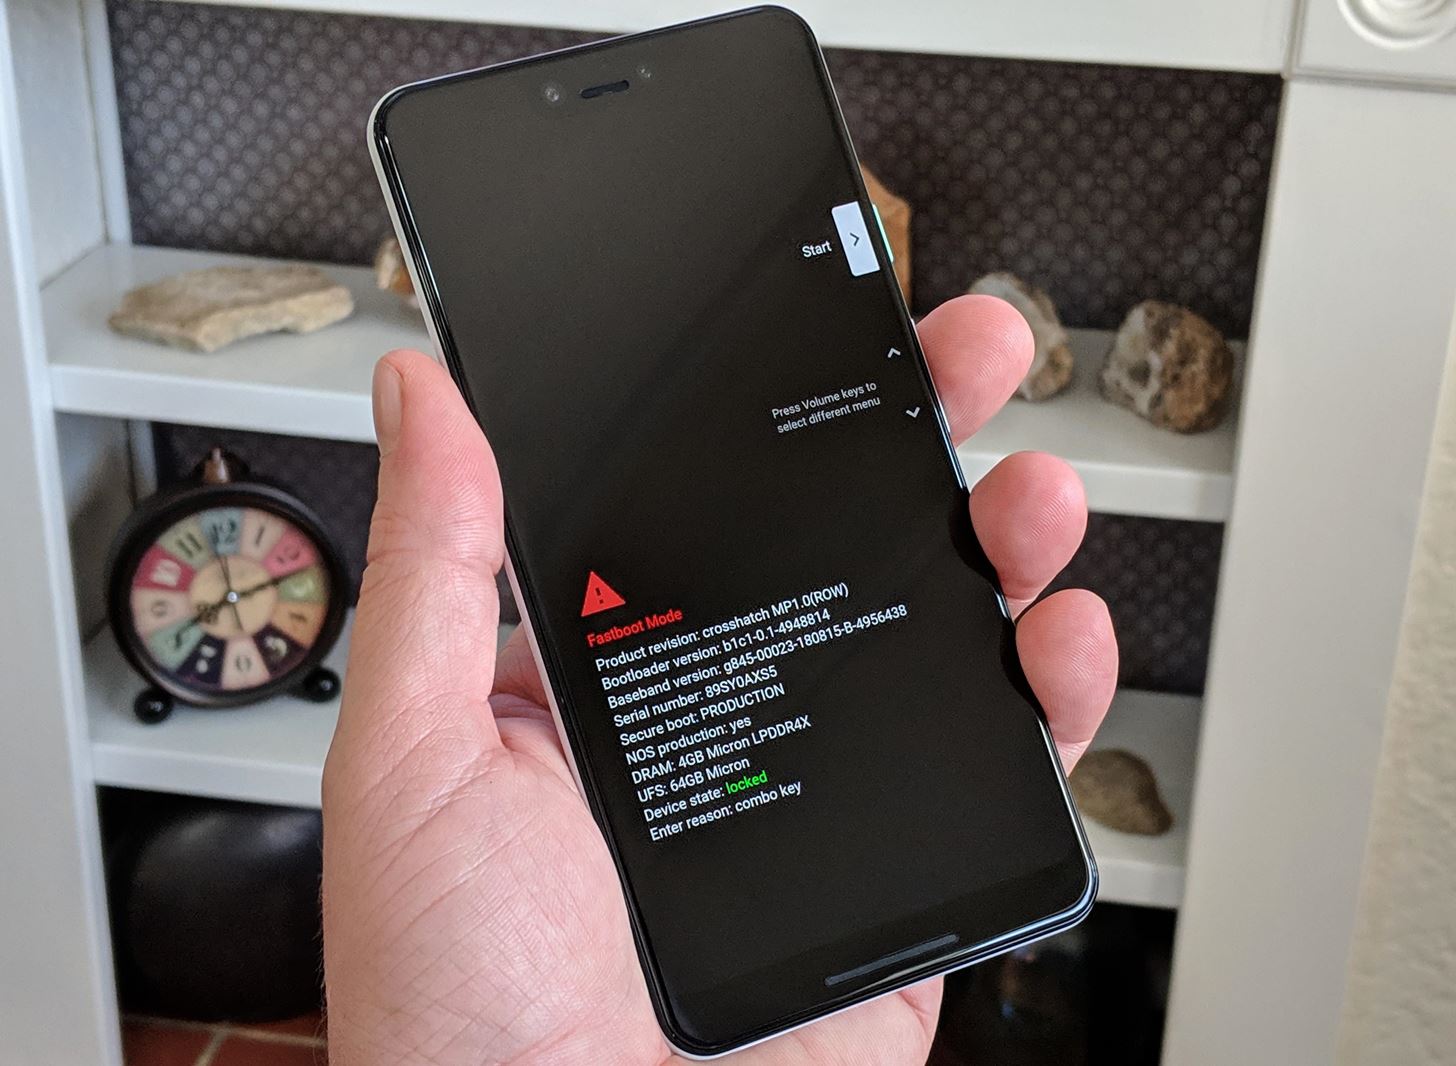 Make OTA Updates Easy by Rooting Your Pixel 3 with Magisk's Boot Image Patch